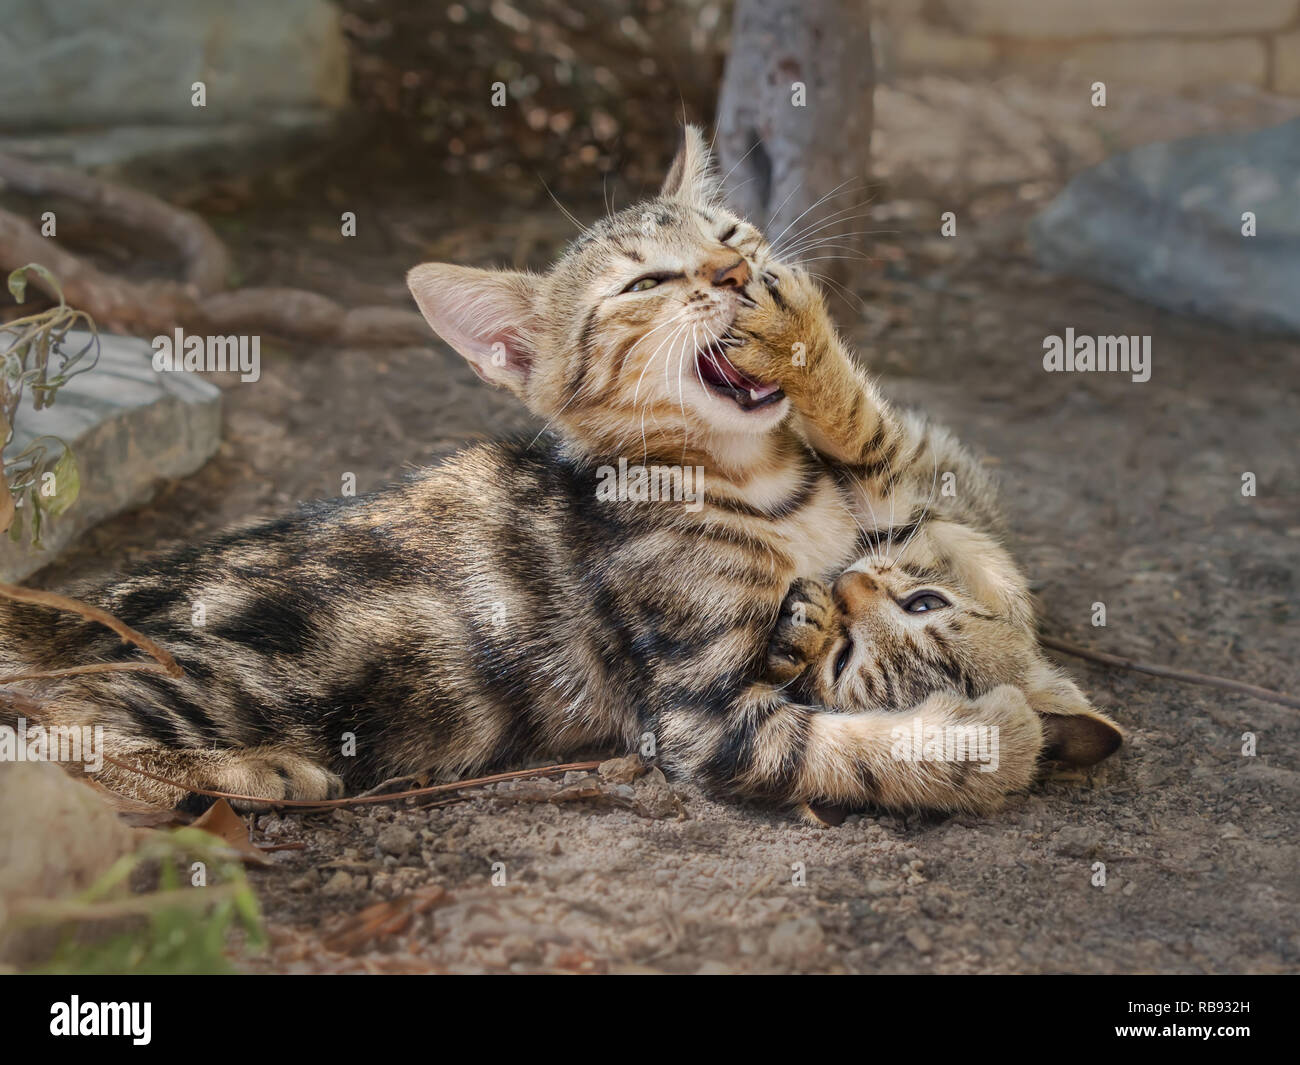 Two brown tabby baby kittens playing and wrestling each other, they use their paws to bat, Cyclades, Aegean island, Greece Stock Photo